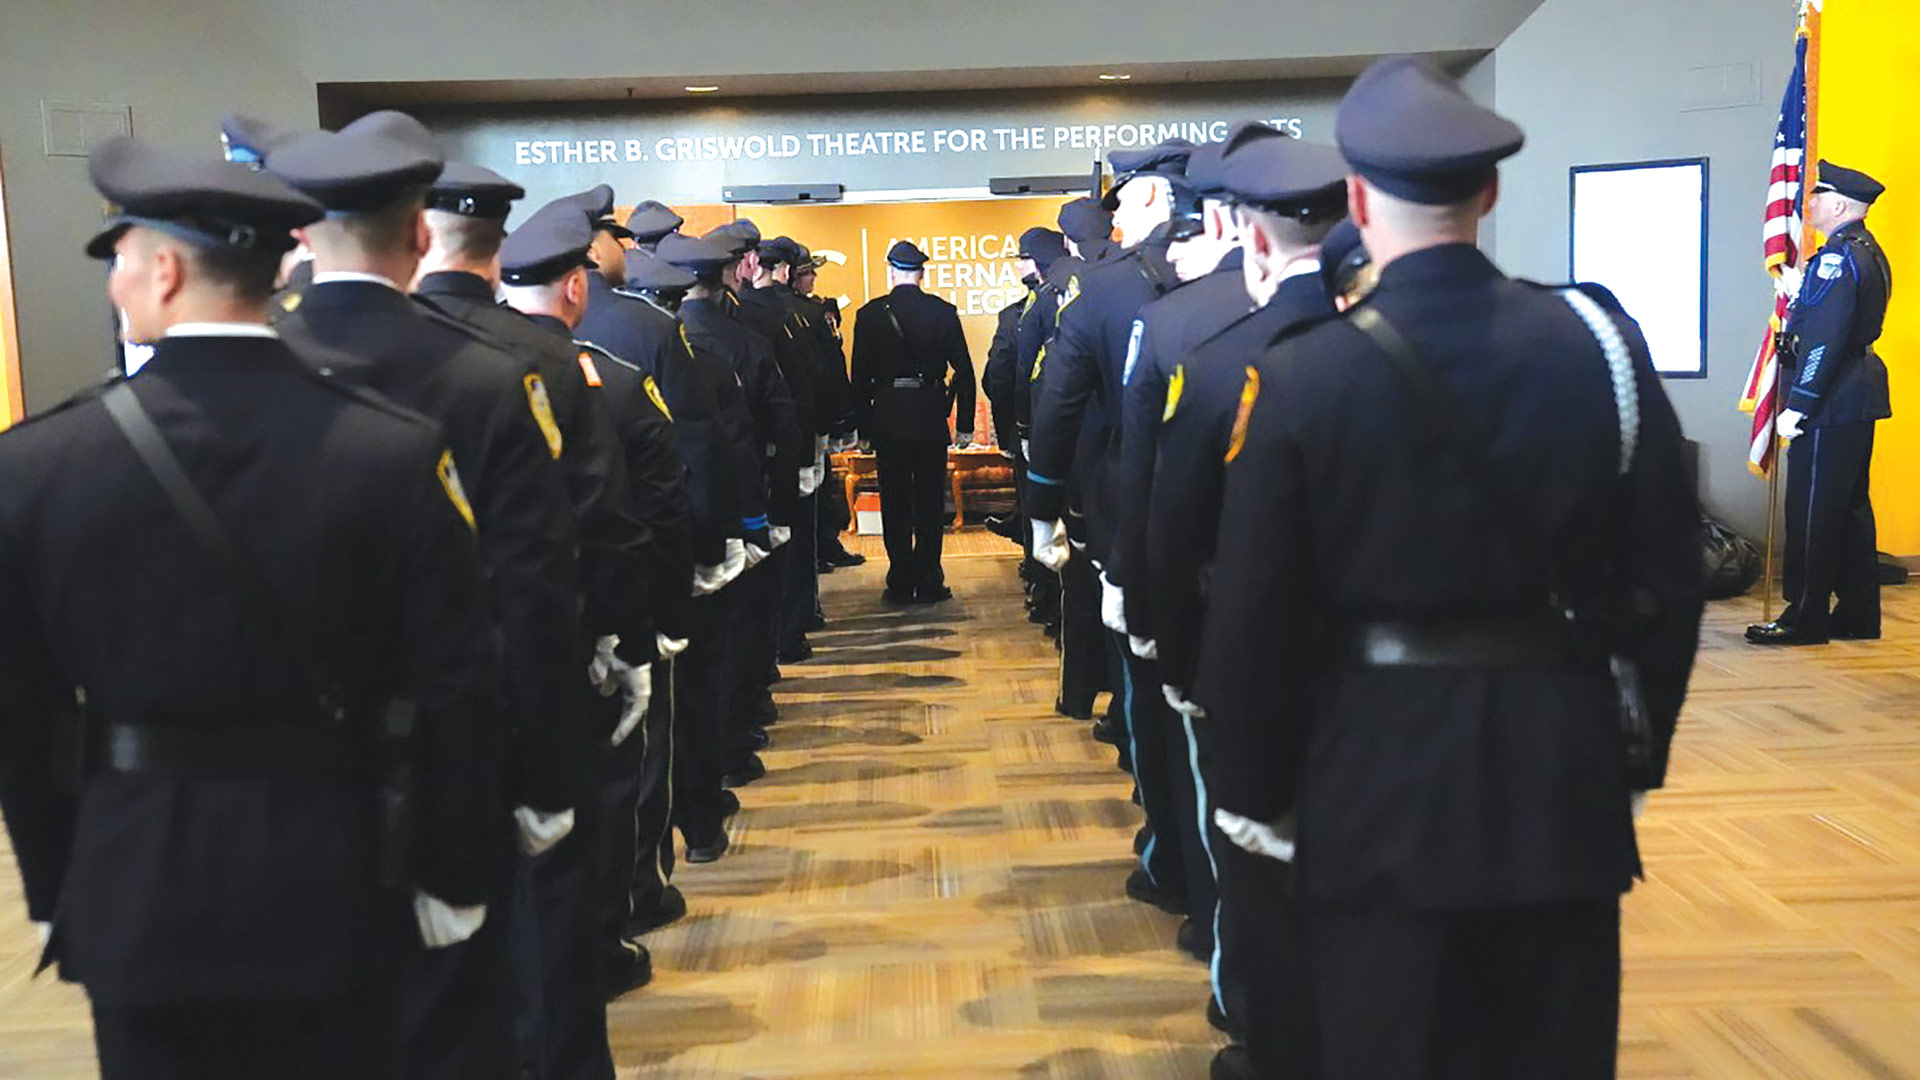 The 65th recruit officer candidate class of the Western Massachusetts Police Academy was saluted in a graduation ceremony held at American International College (AIC) on March 17.